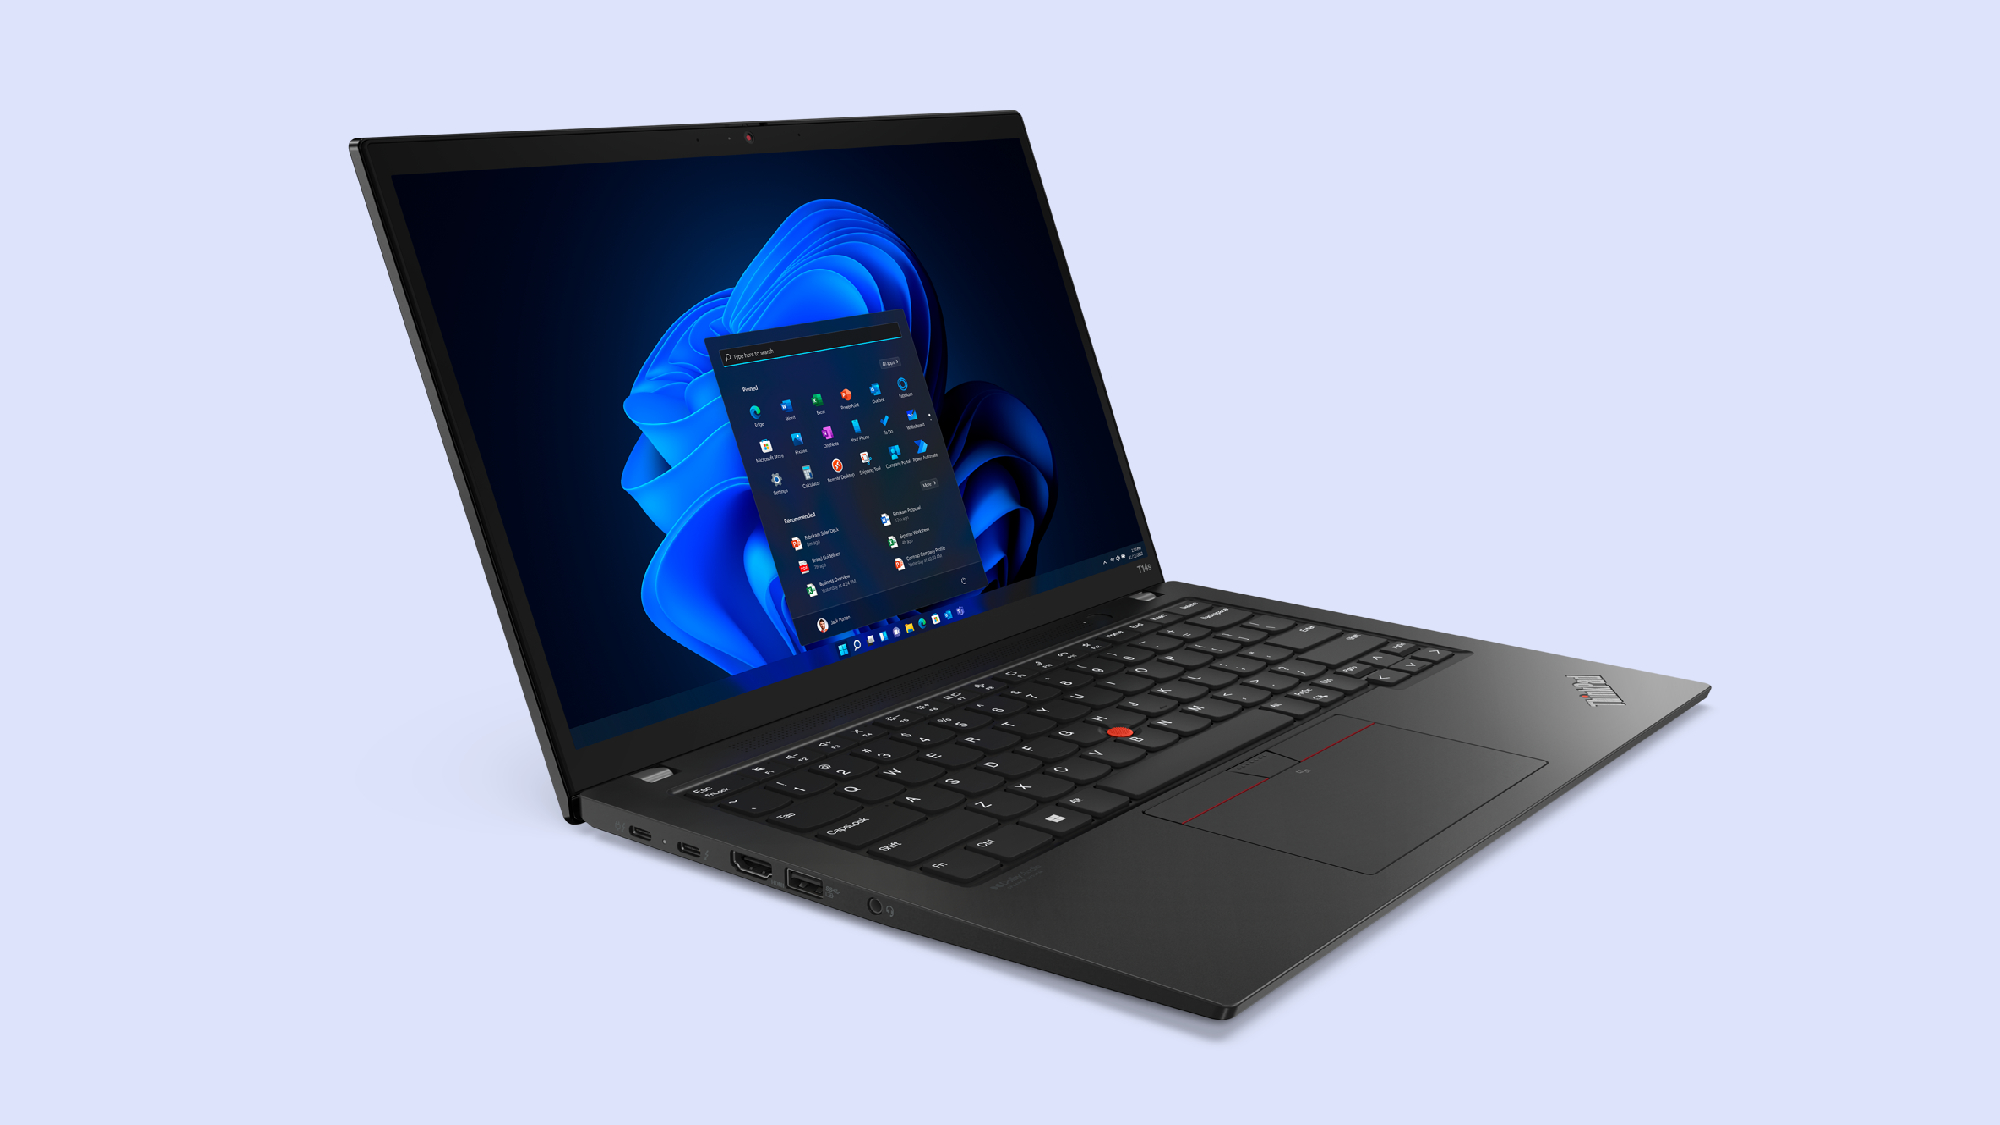 DELA DISCOUNT Mfi6UudzqgQbhuR2msefaA Lenovo announces new ThinkPads at MWC Barcelona 2022 — one is the world's first Snapdragon 8cx Gen 3 laptop DELA DISCOUNT  